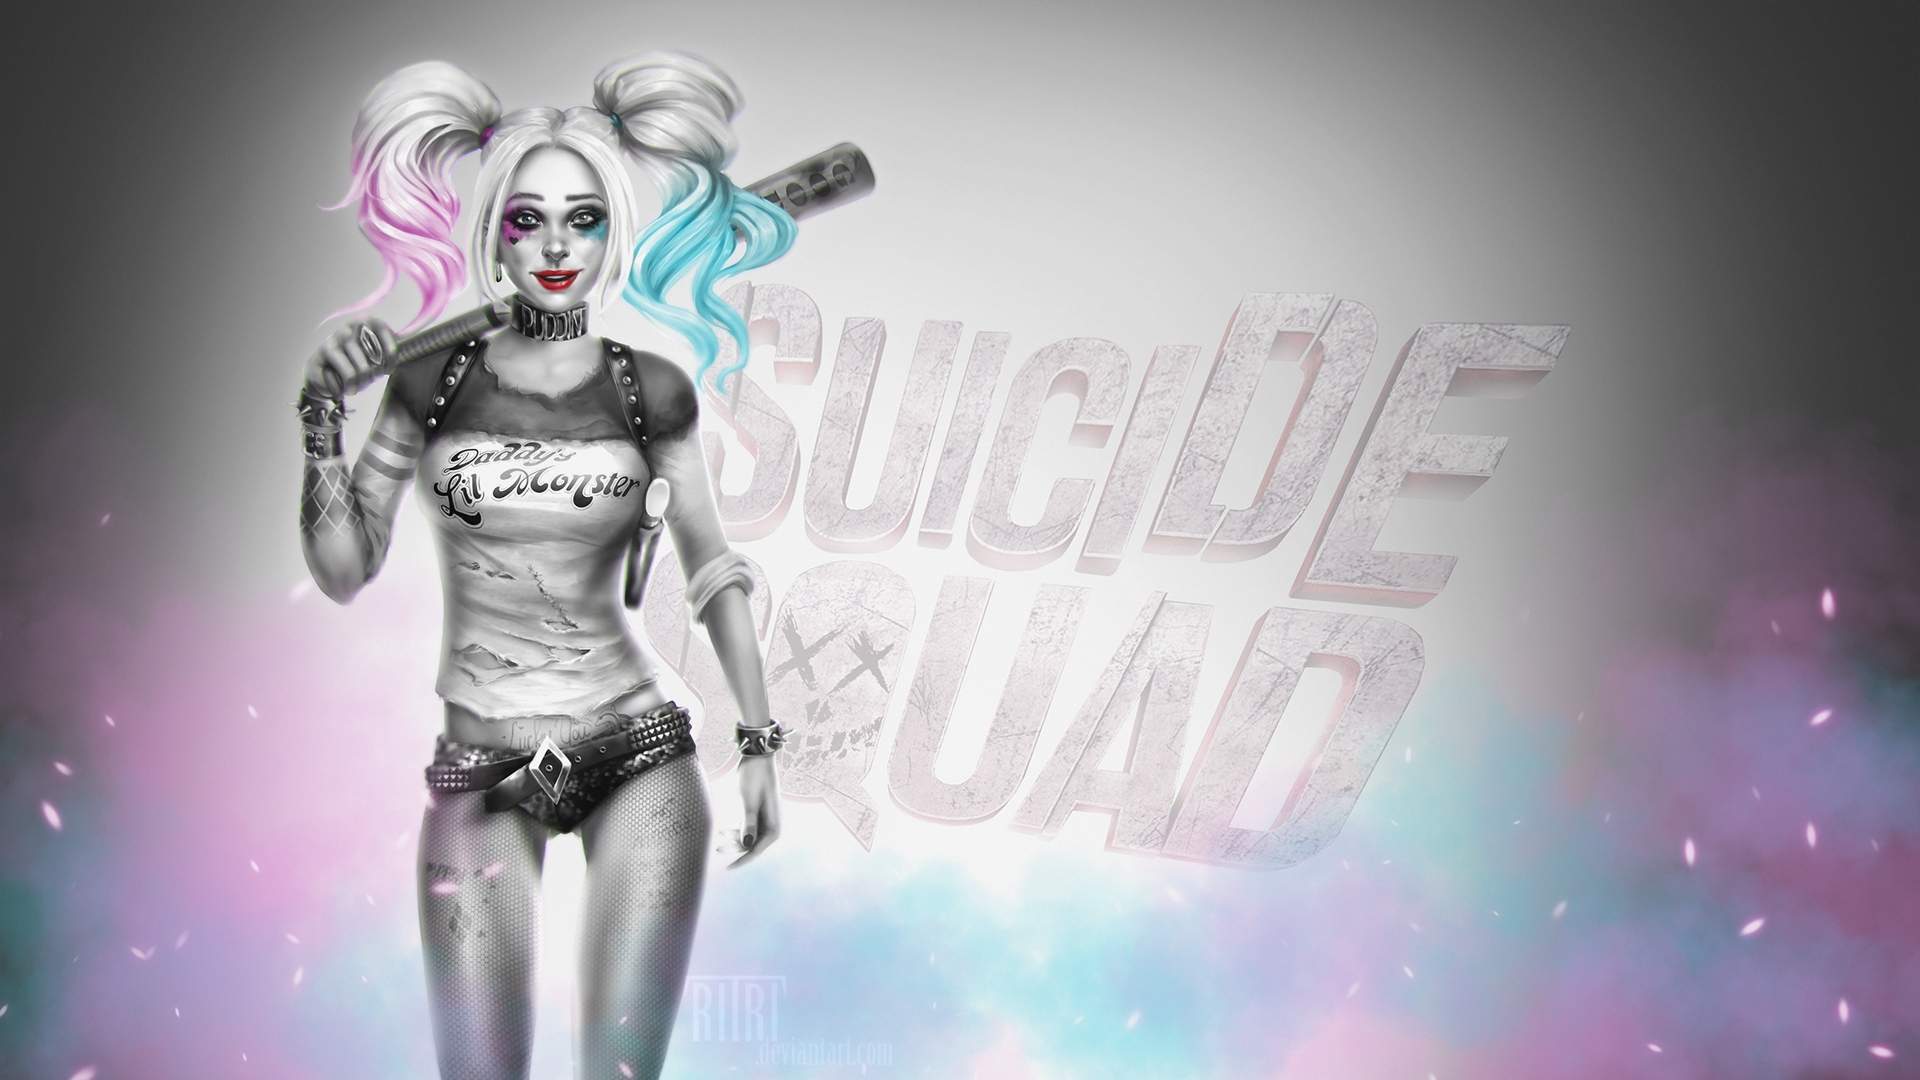 Suicide Squad Harley Quinn Wallpaper HD Of Suicide Squad Film